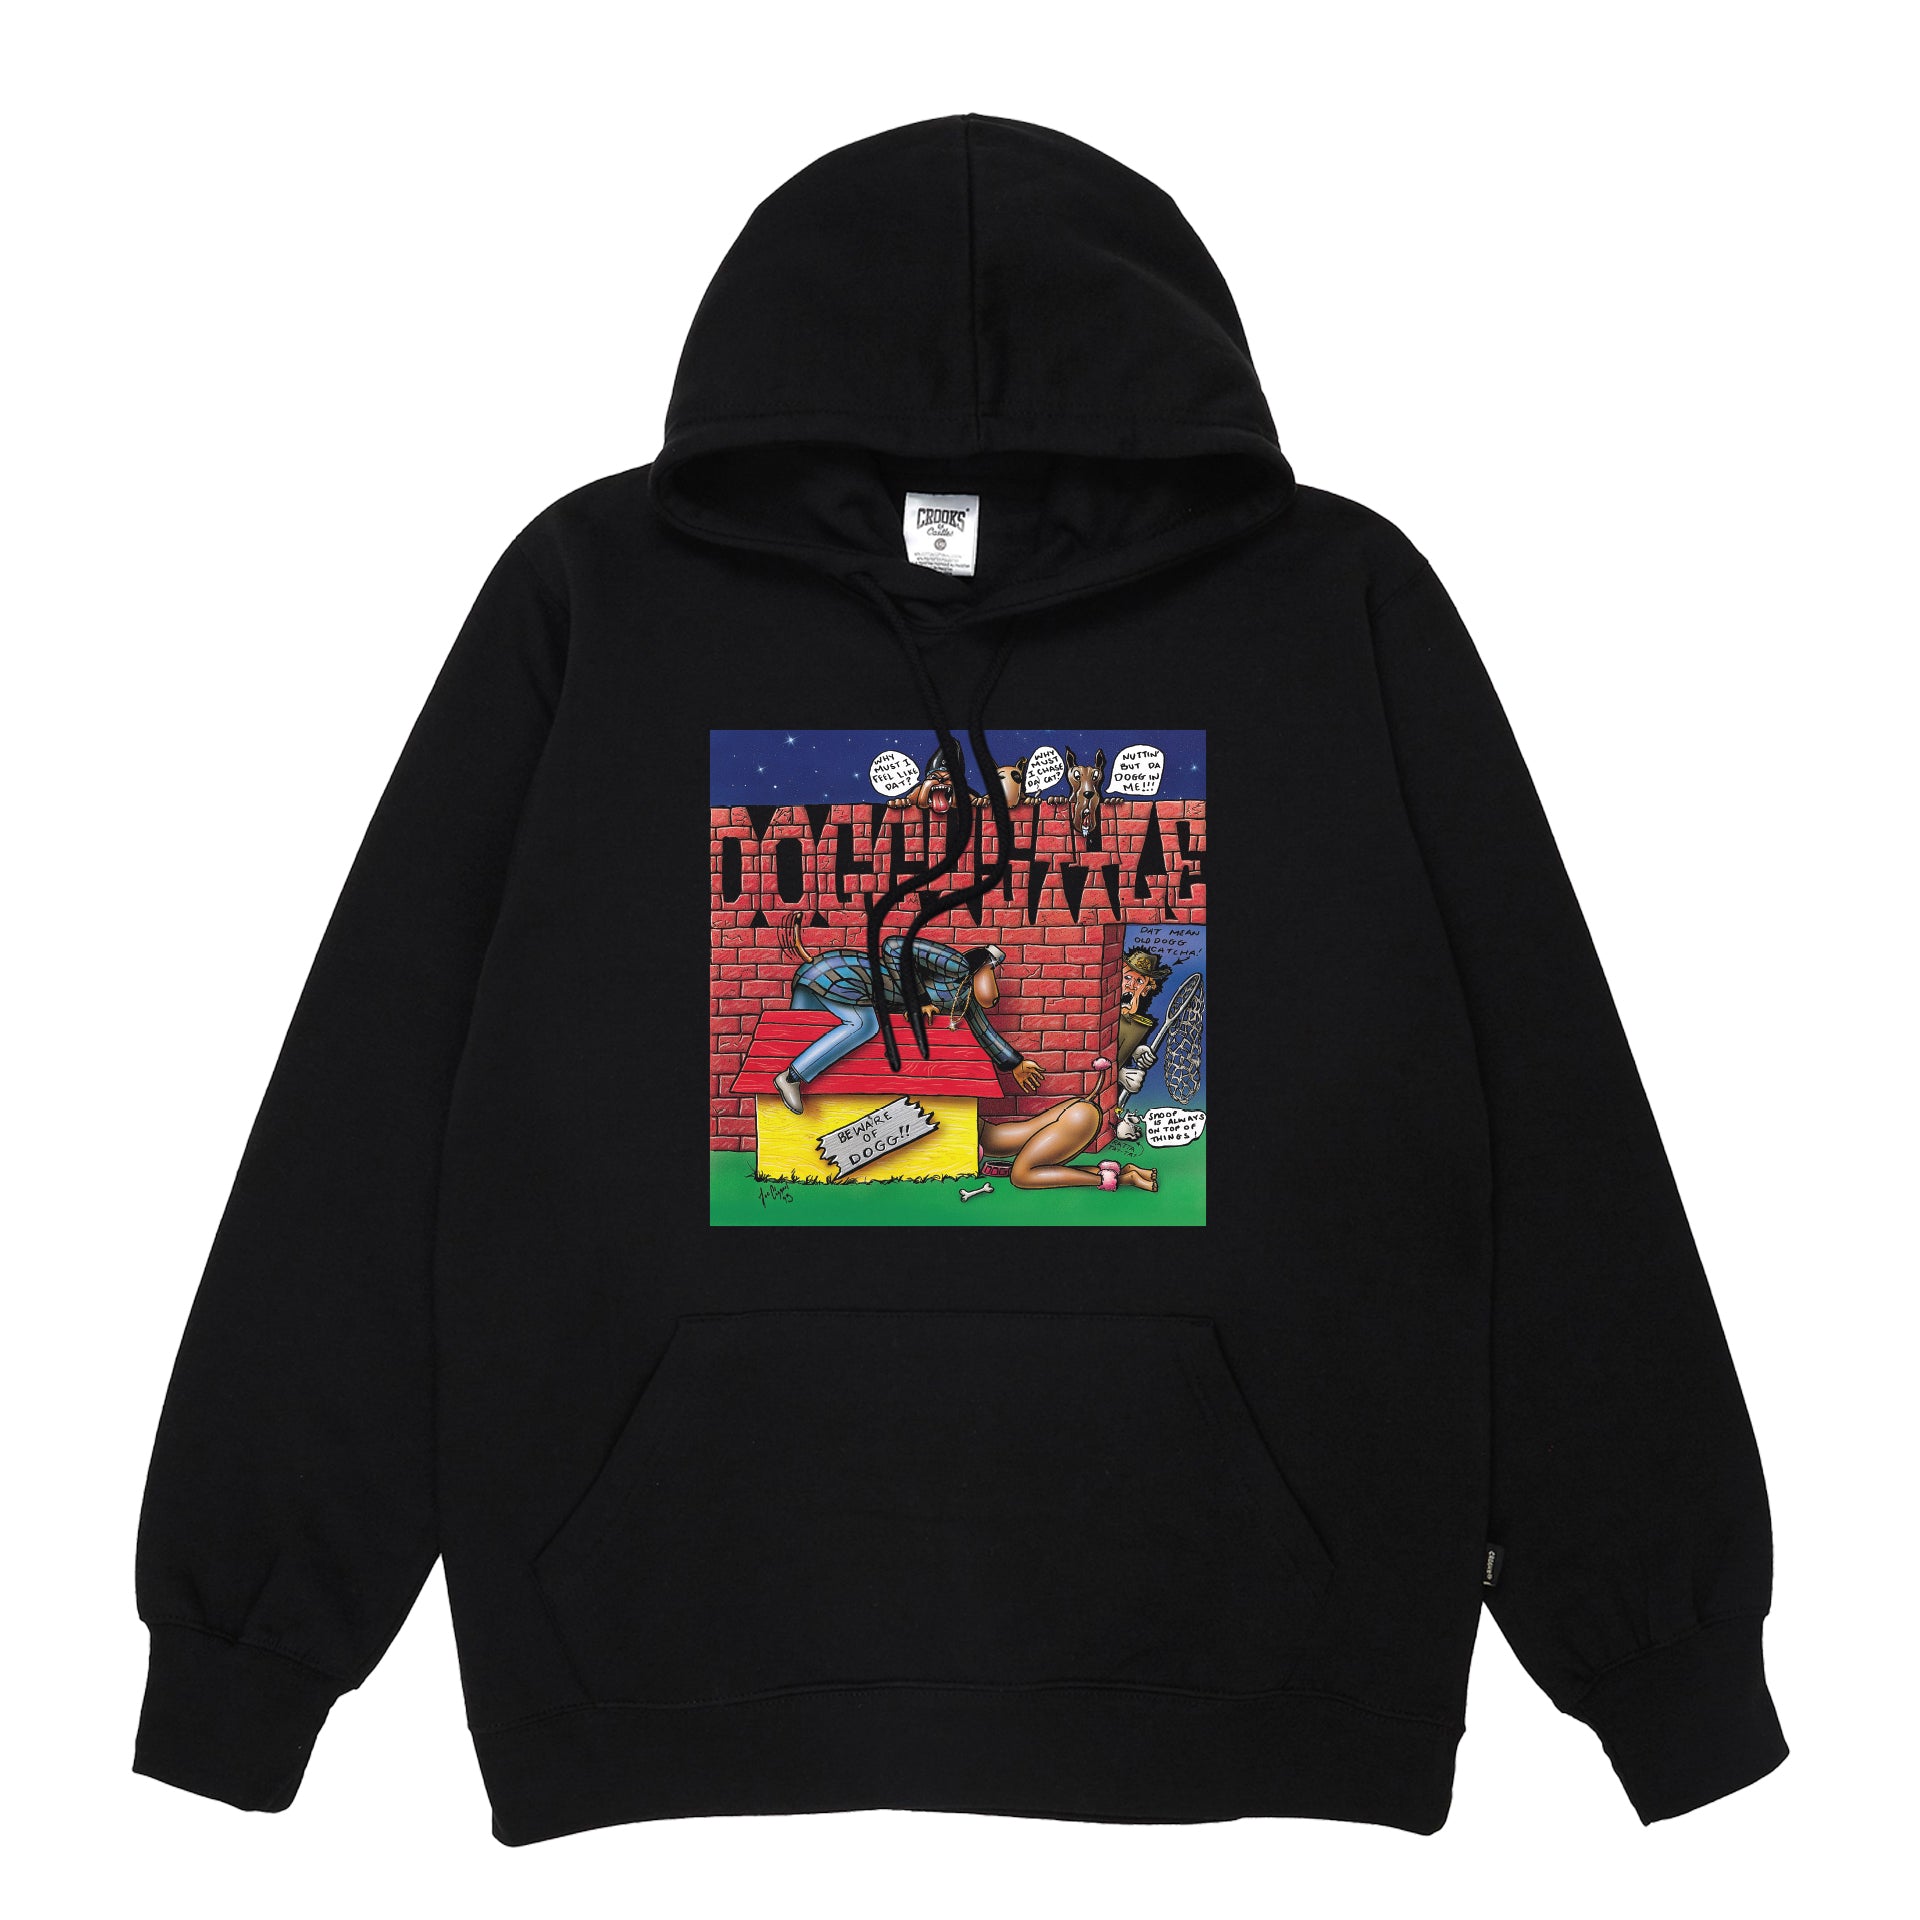 Doggystyle Limited Edition Hoodie